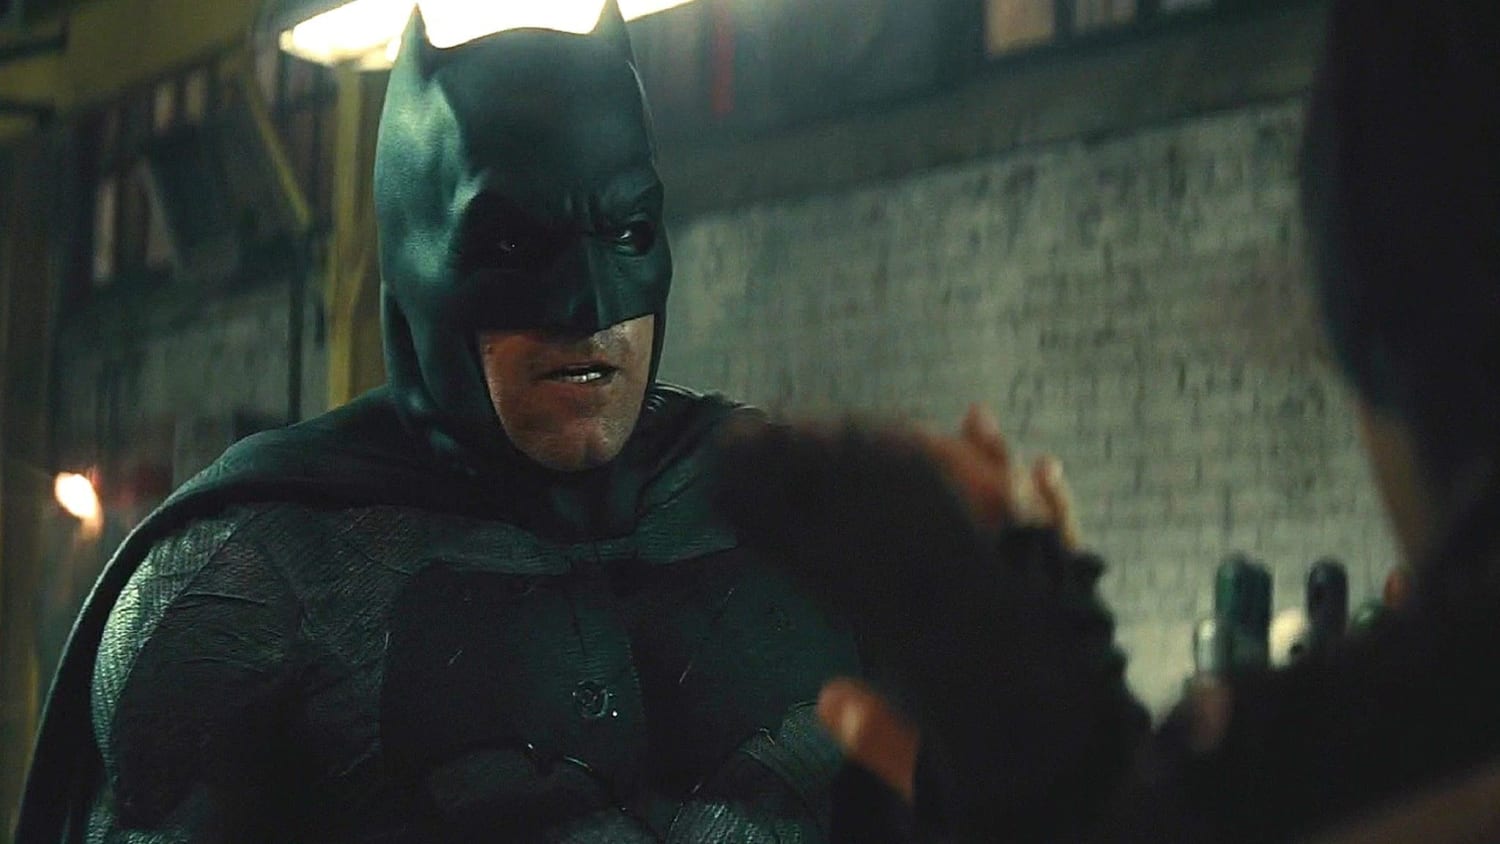 [EXCLUSIVE] Ben Affleck Signs on for HBO Max and More Films as Batman